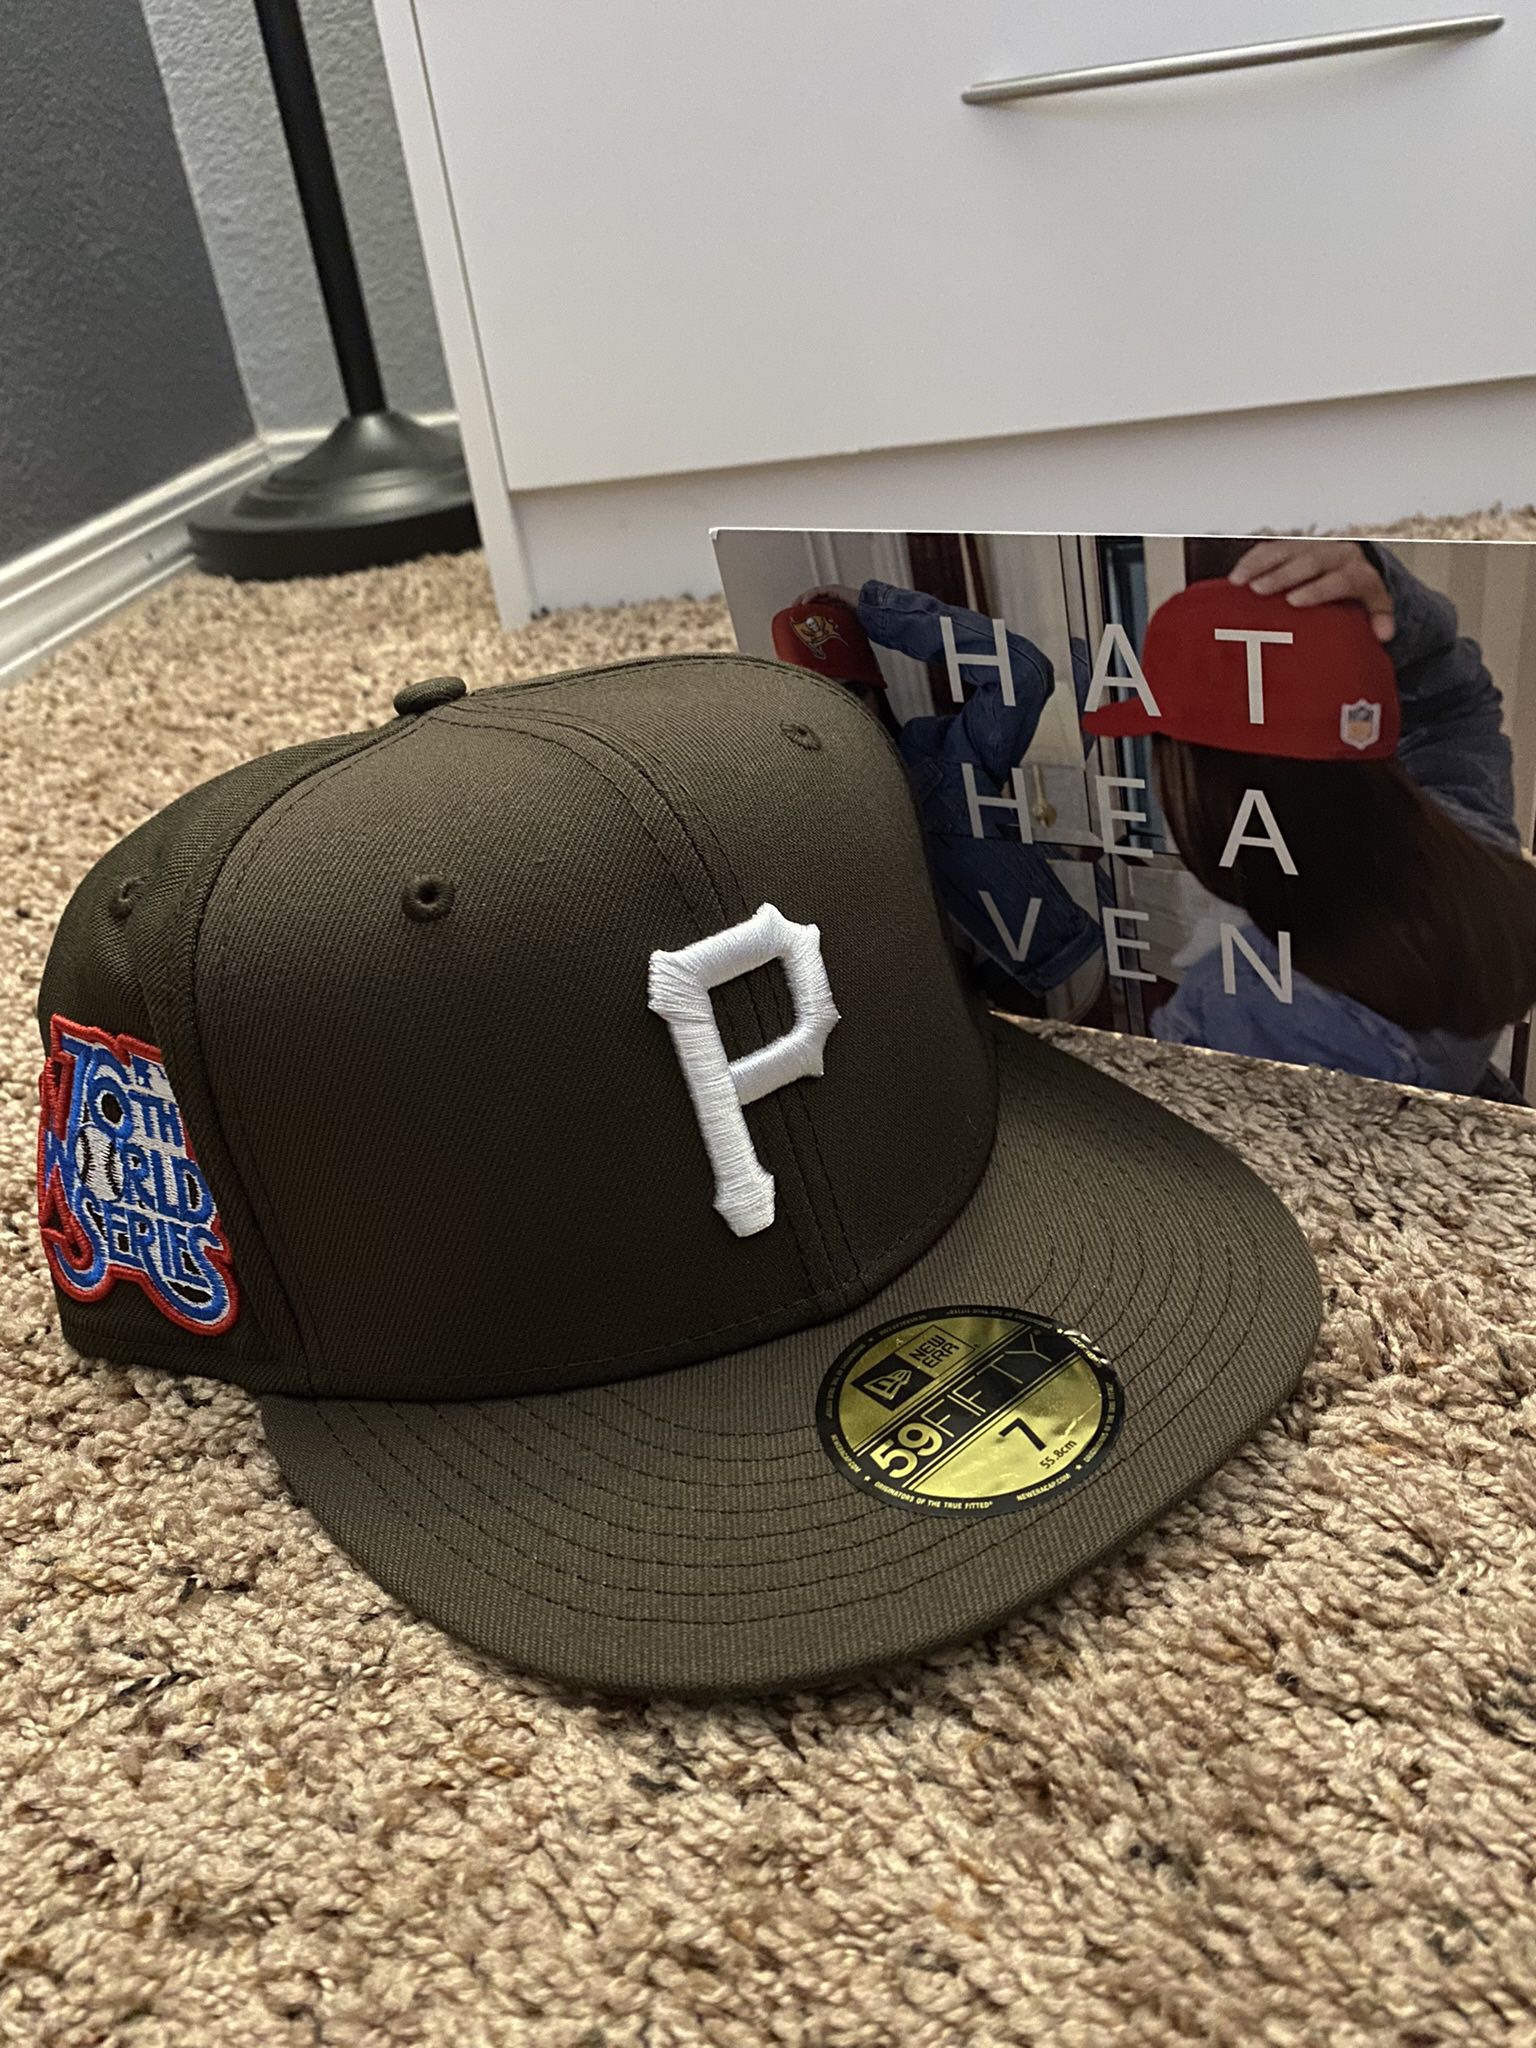 Pittsburgh Pirates Fitted Hat for Sale in Palmdale, CA - OfferUp